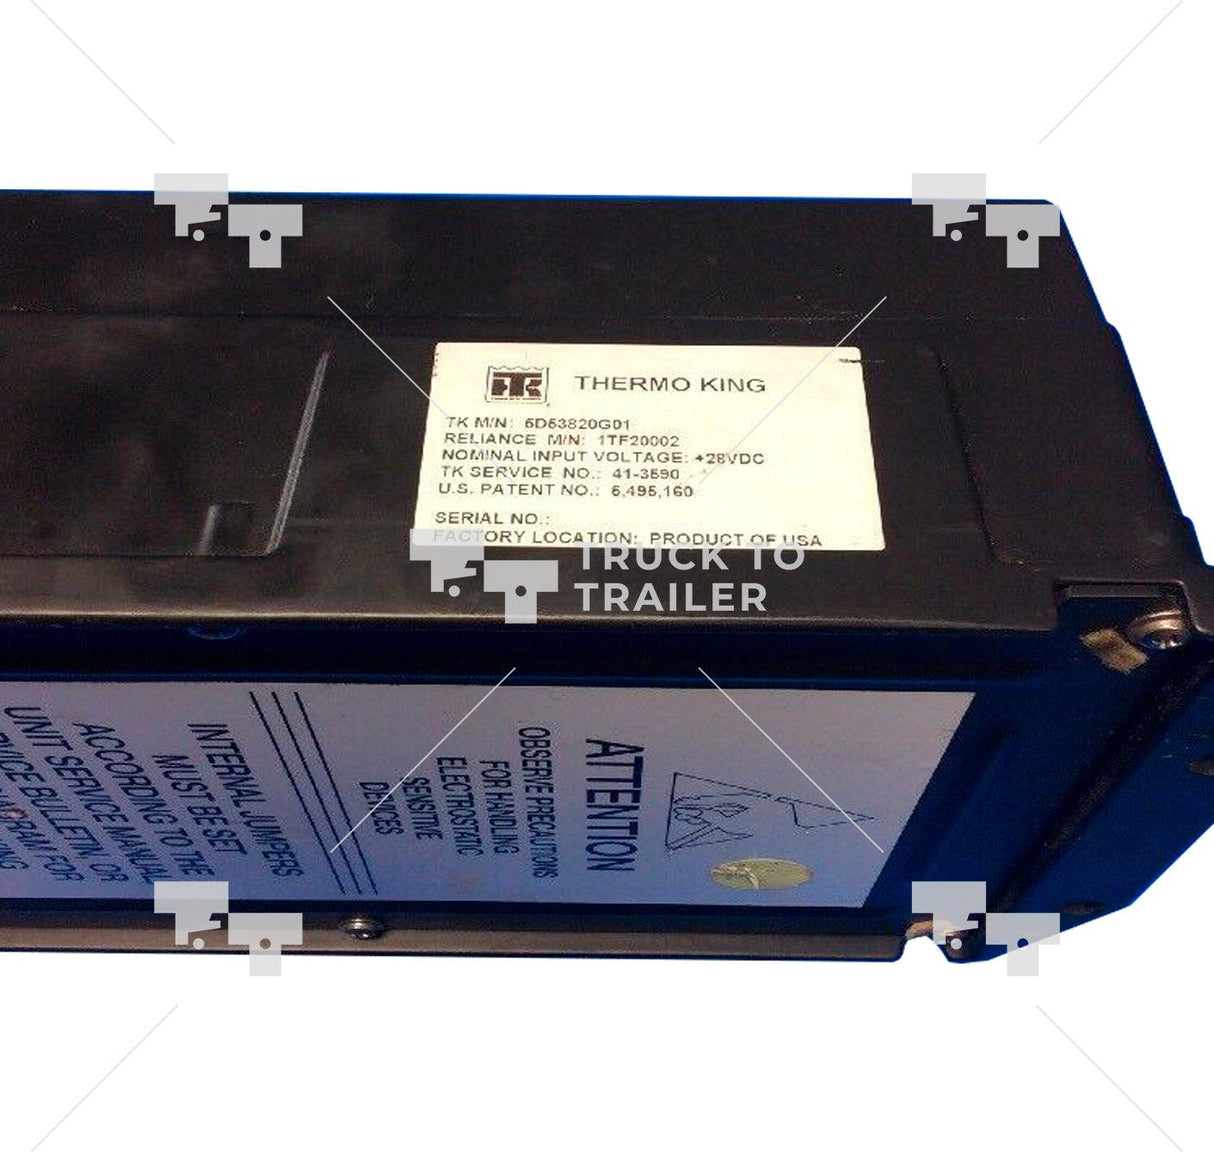 423794 Genuine Thermo King® Ecu Motor Controller - Truck To Trailer